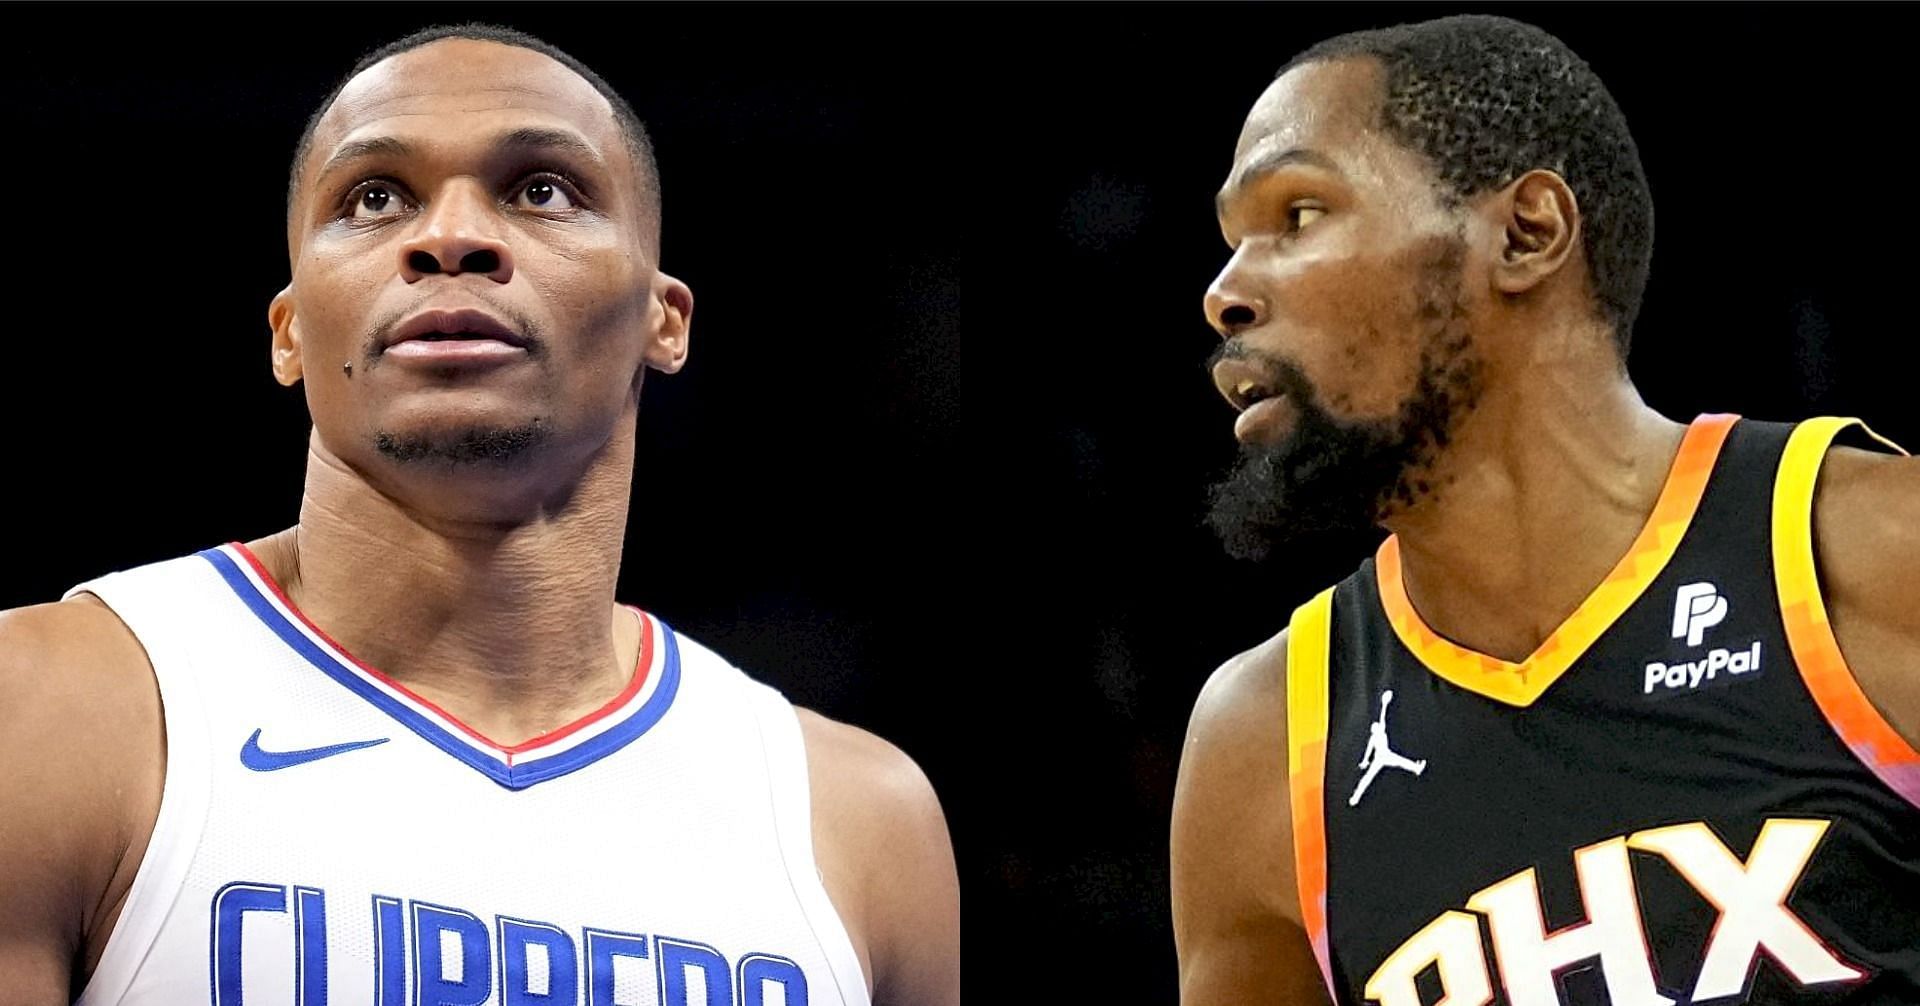 NBA stars Russell Westbrook and Kevin Durant